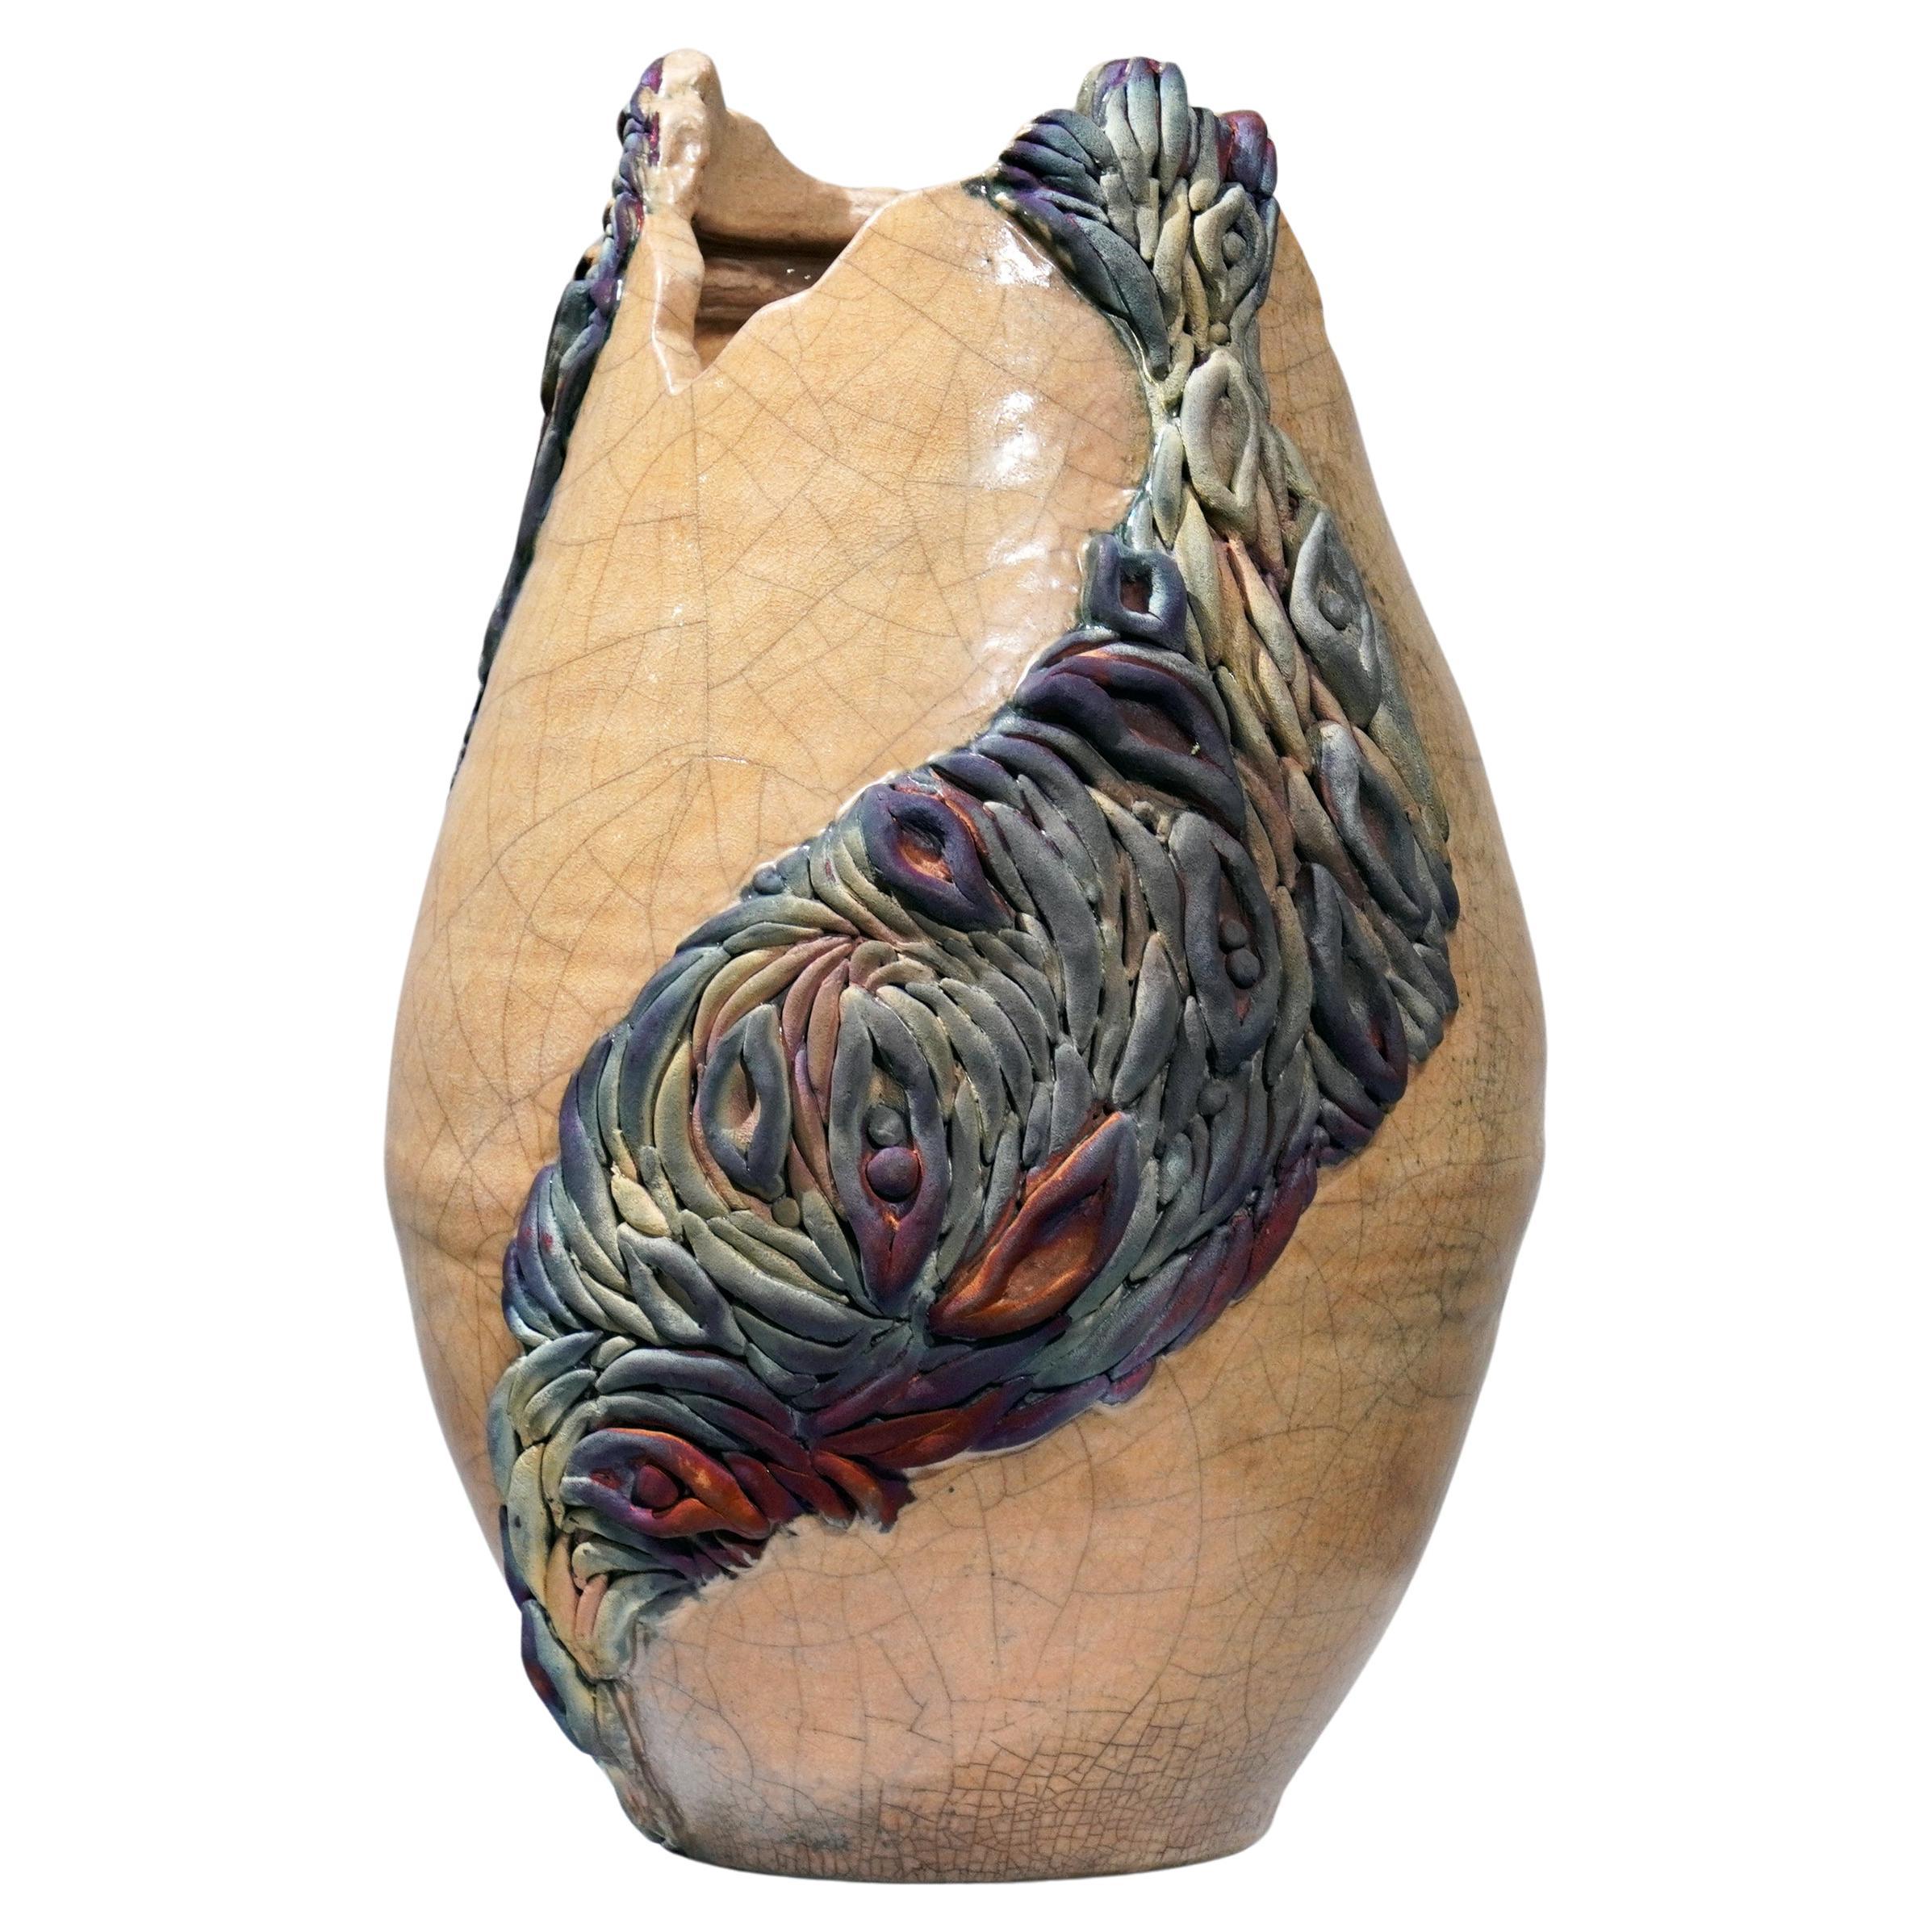 Human - life magnified collection raku ceramic pottery sculpture by Adil Ghani For Sale